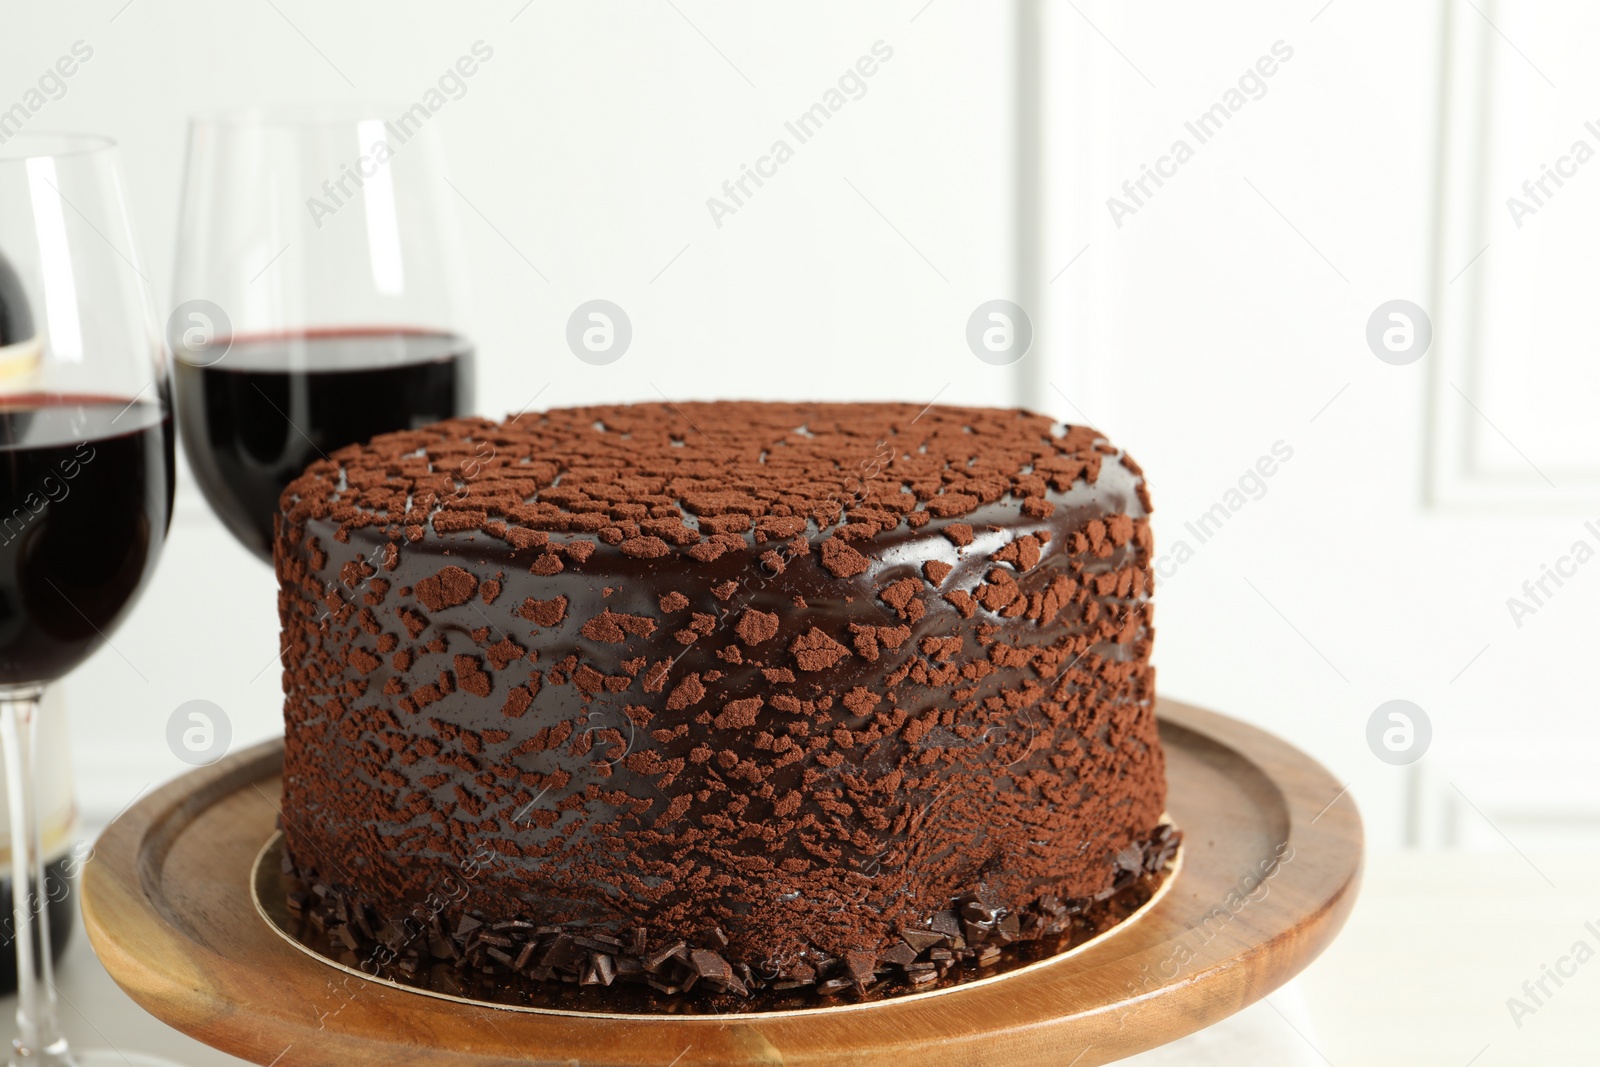 Photo of Delicious chocolate truffle cake and red wine on table